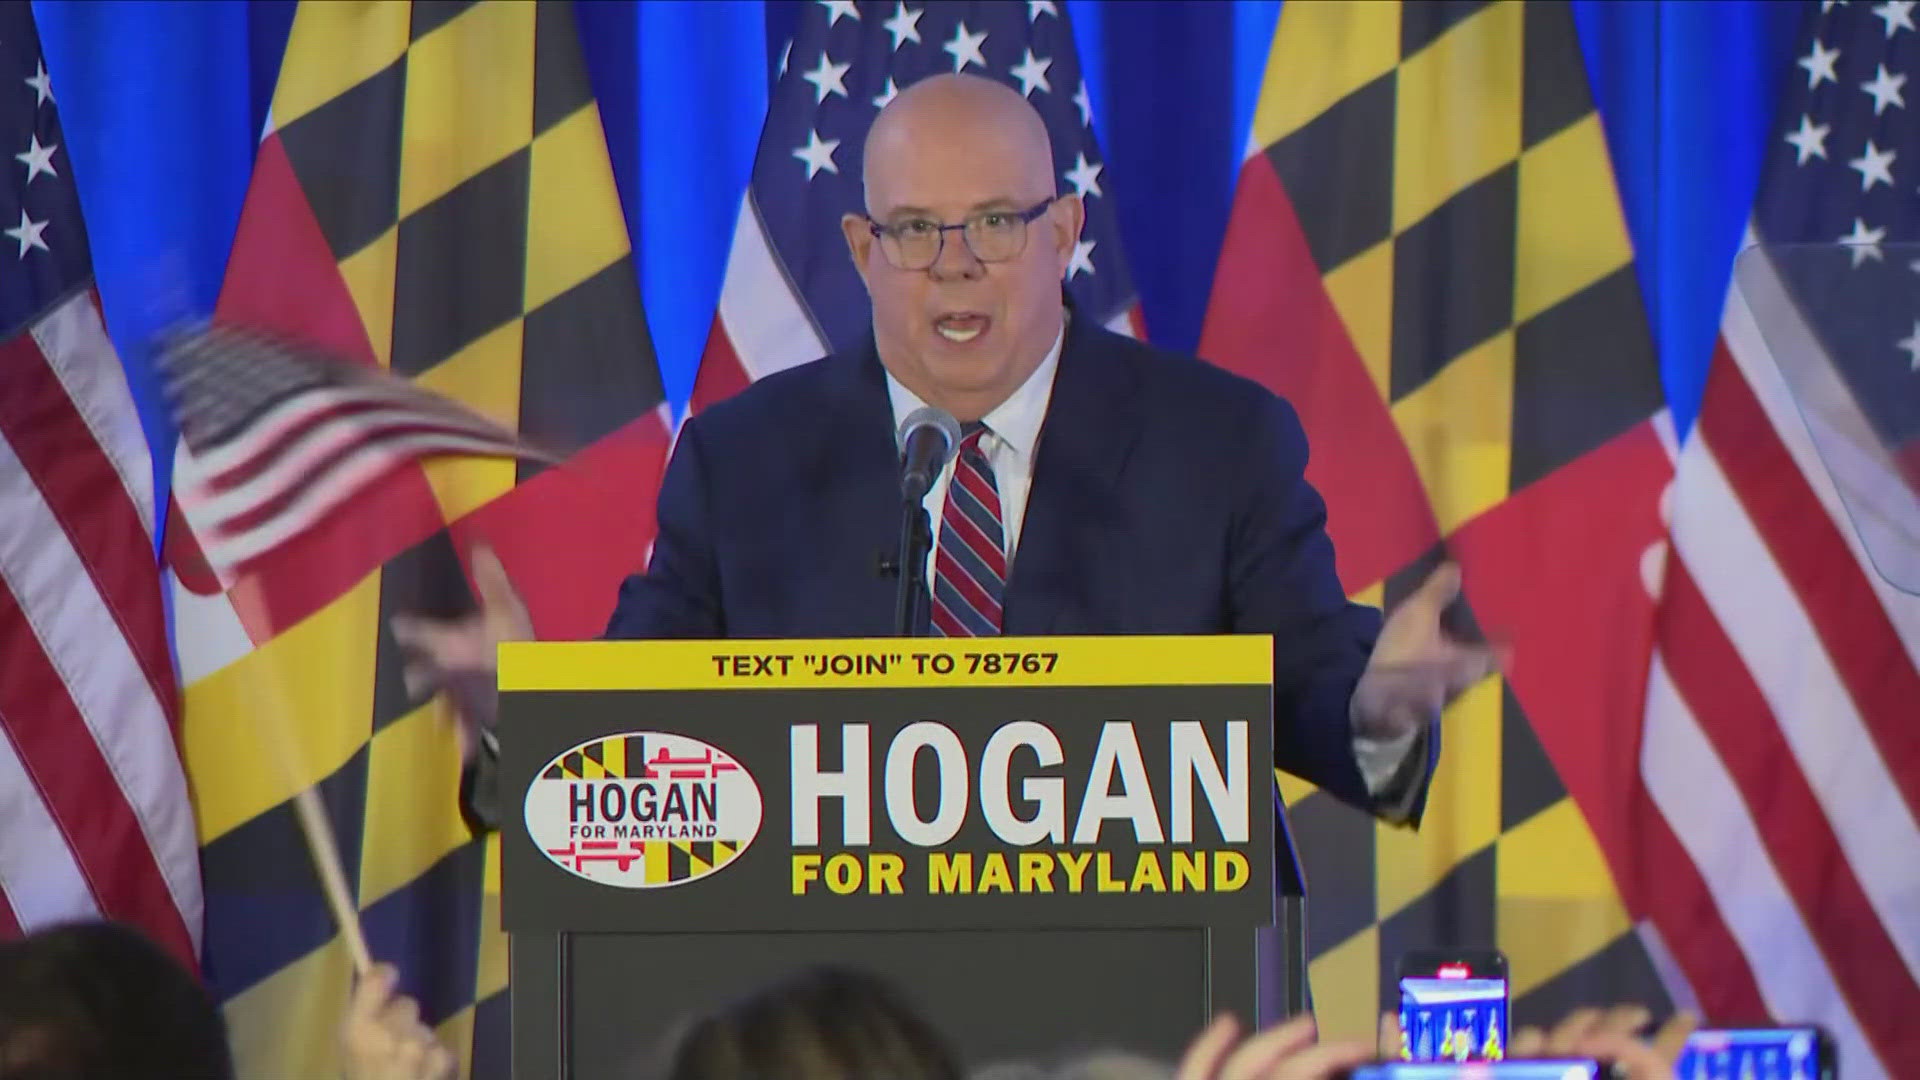 Hogan says he now describes his position on abortion as pro-choice.